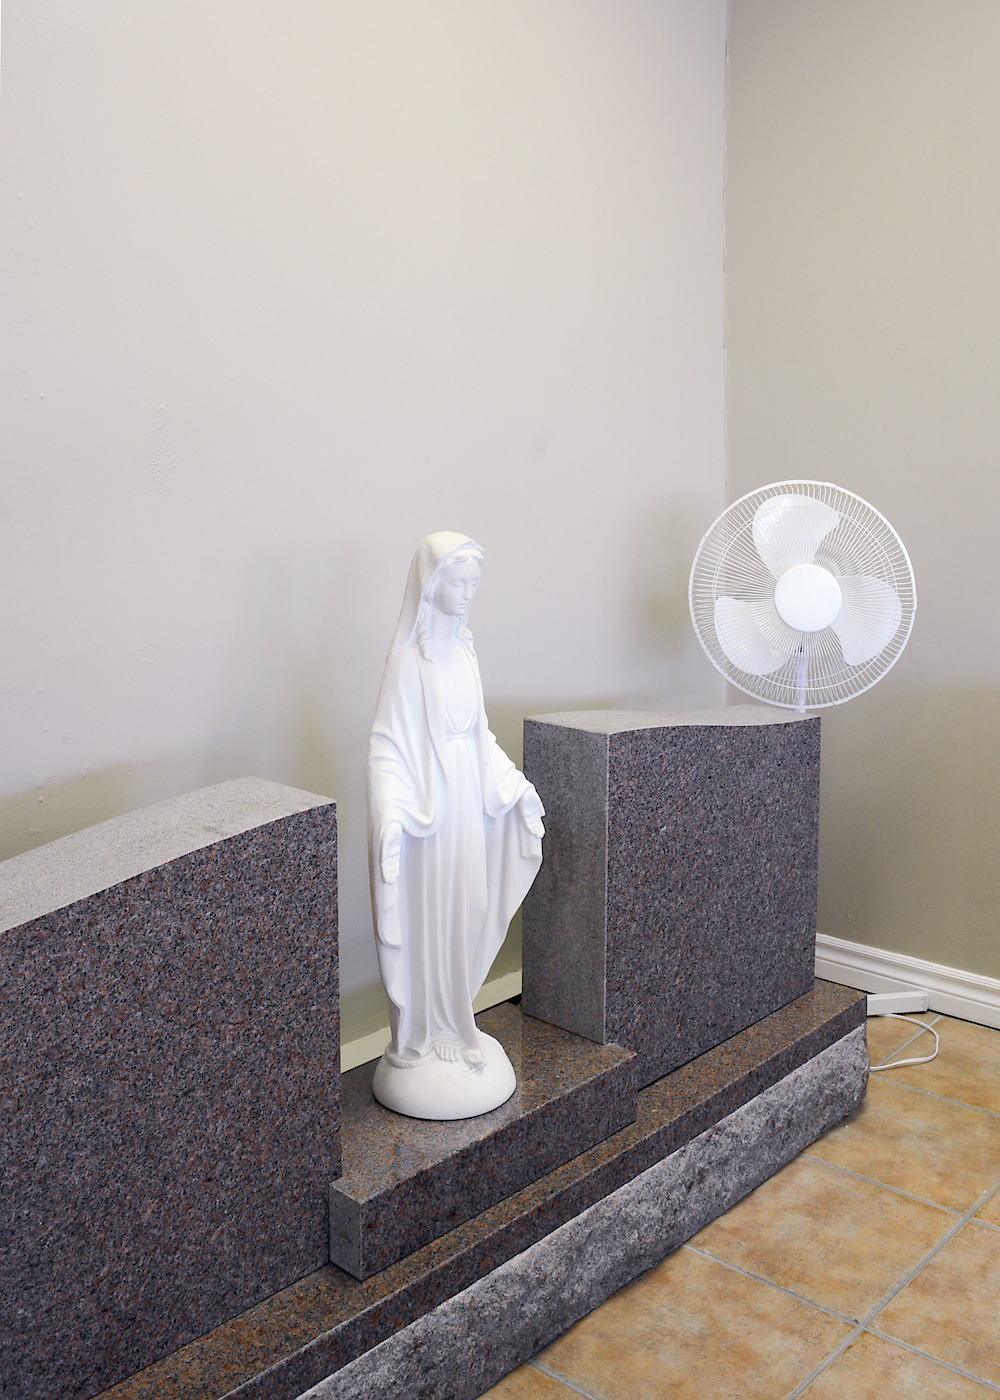 Adrienna Matzeg: Speakers; Blue Tarp; Surveillance; Flower Saddles; White Fan (from the series Why do we have Funerals?)